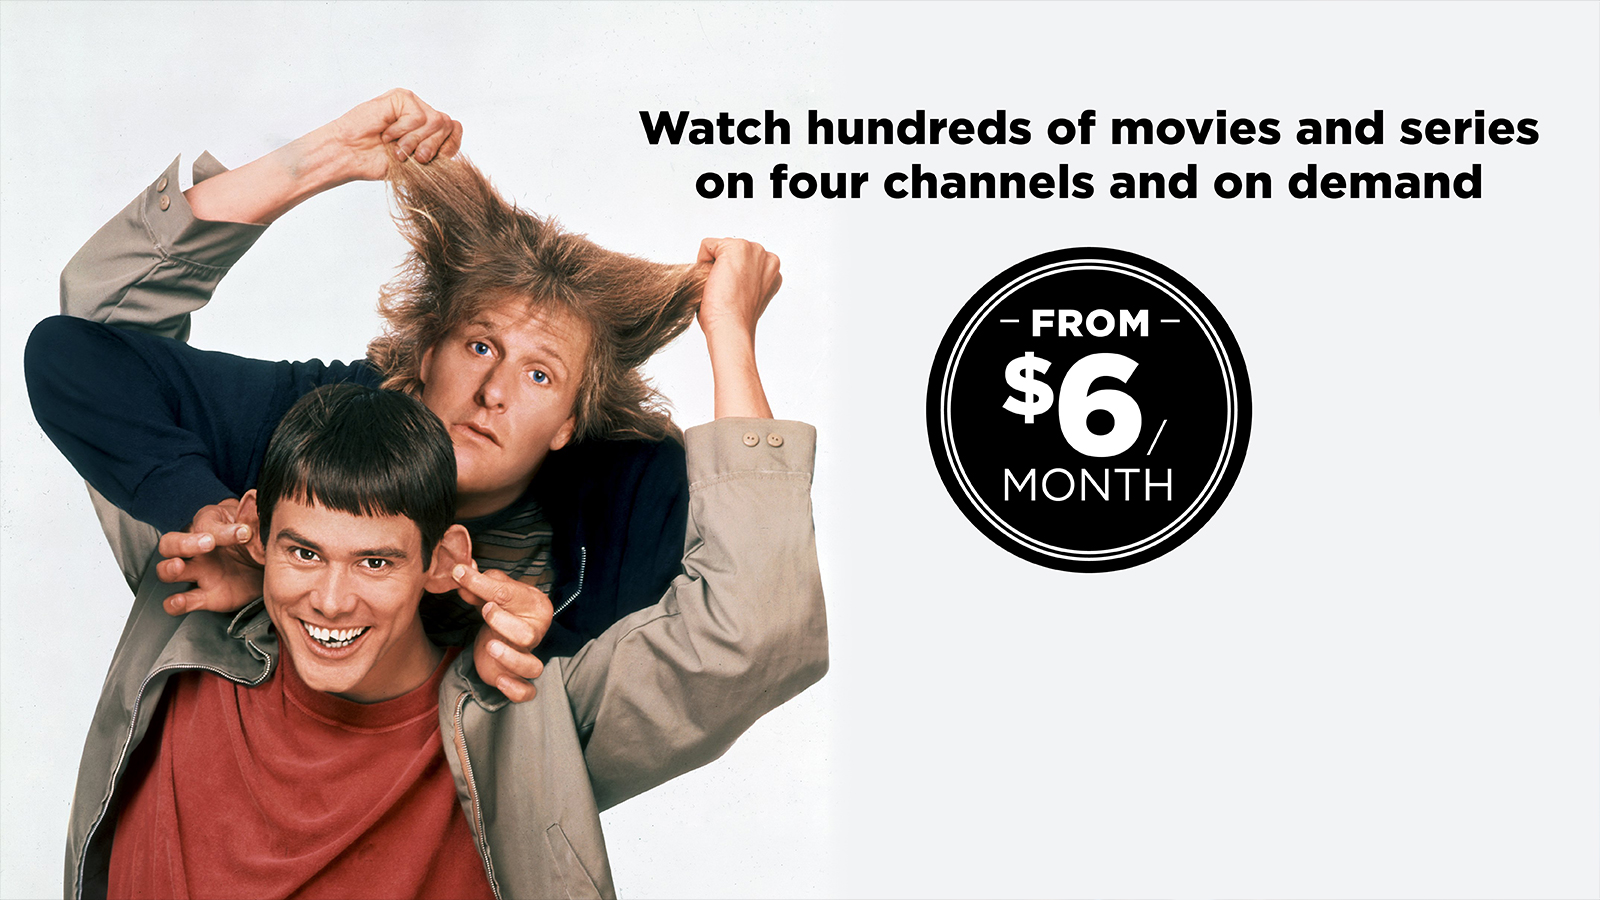 Watch hundreds of movies and series on four channels and on demand from $6/month